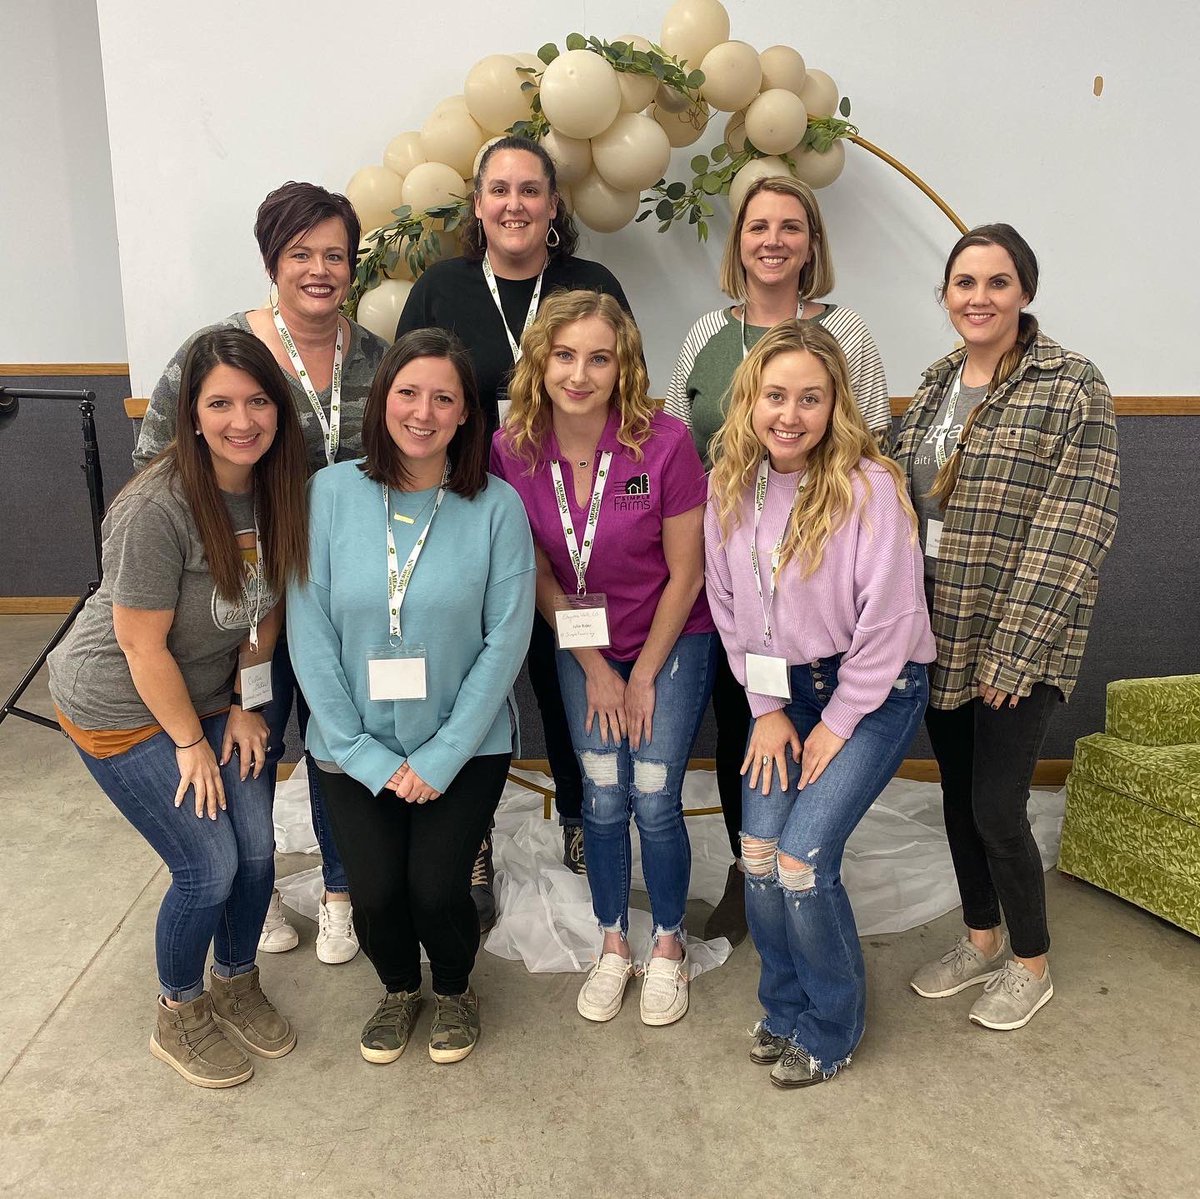 Day1 of #cultivatingcourage connecting w/Women in Ag. Great to meet amazing woman from around the world. Definitely filled my cup to the top & then some. Beyond grateful for the opportunity to spend the day at such an uplifting event & be apart of a community of boss ladies!#farm